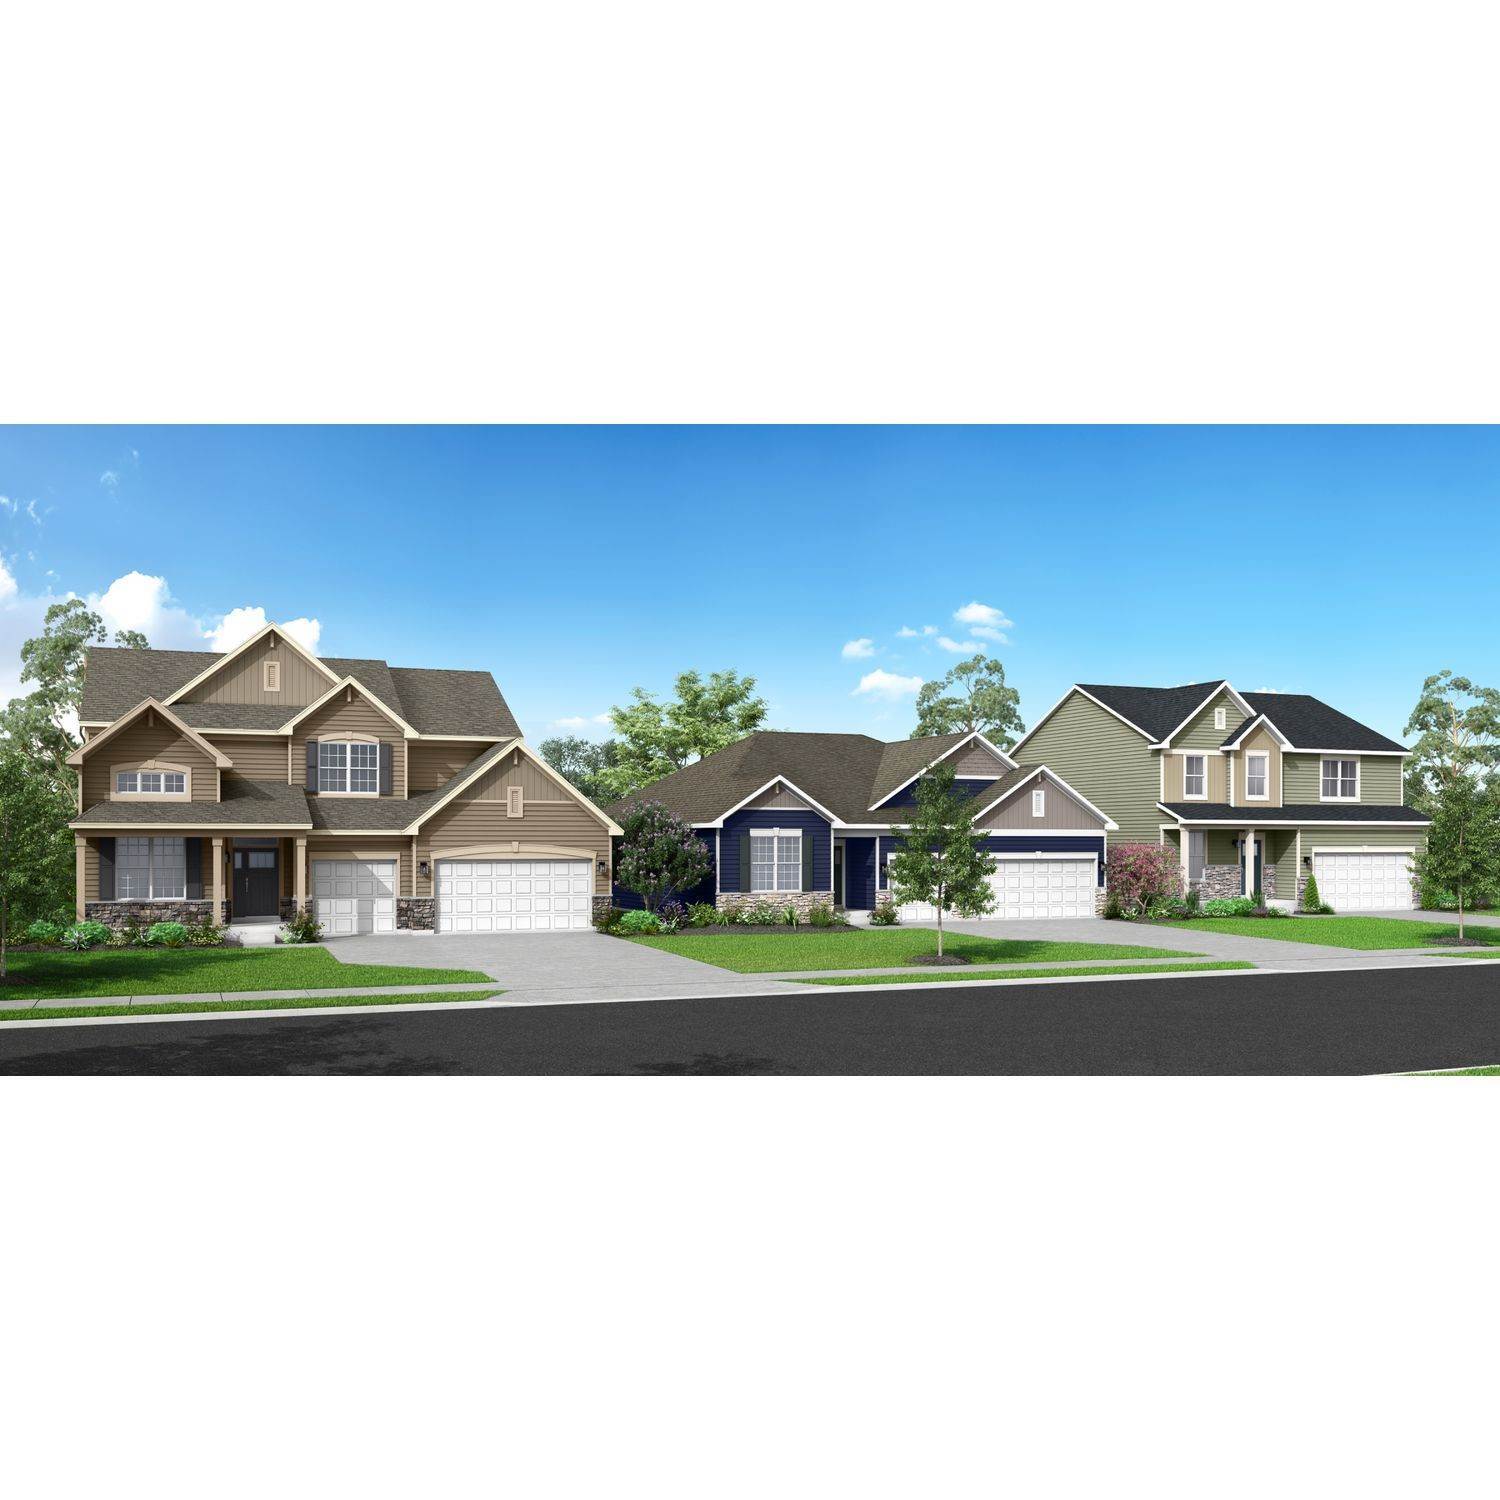 Windsor Crossing xây dựng tại 3993 Banbury Street, Windsor, WI 53598